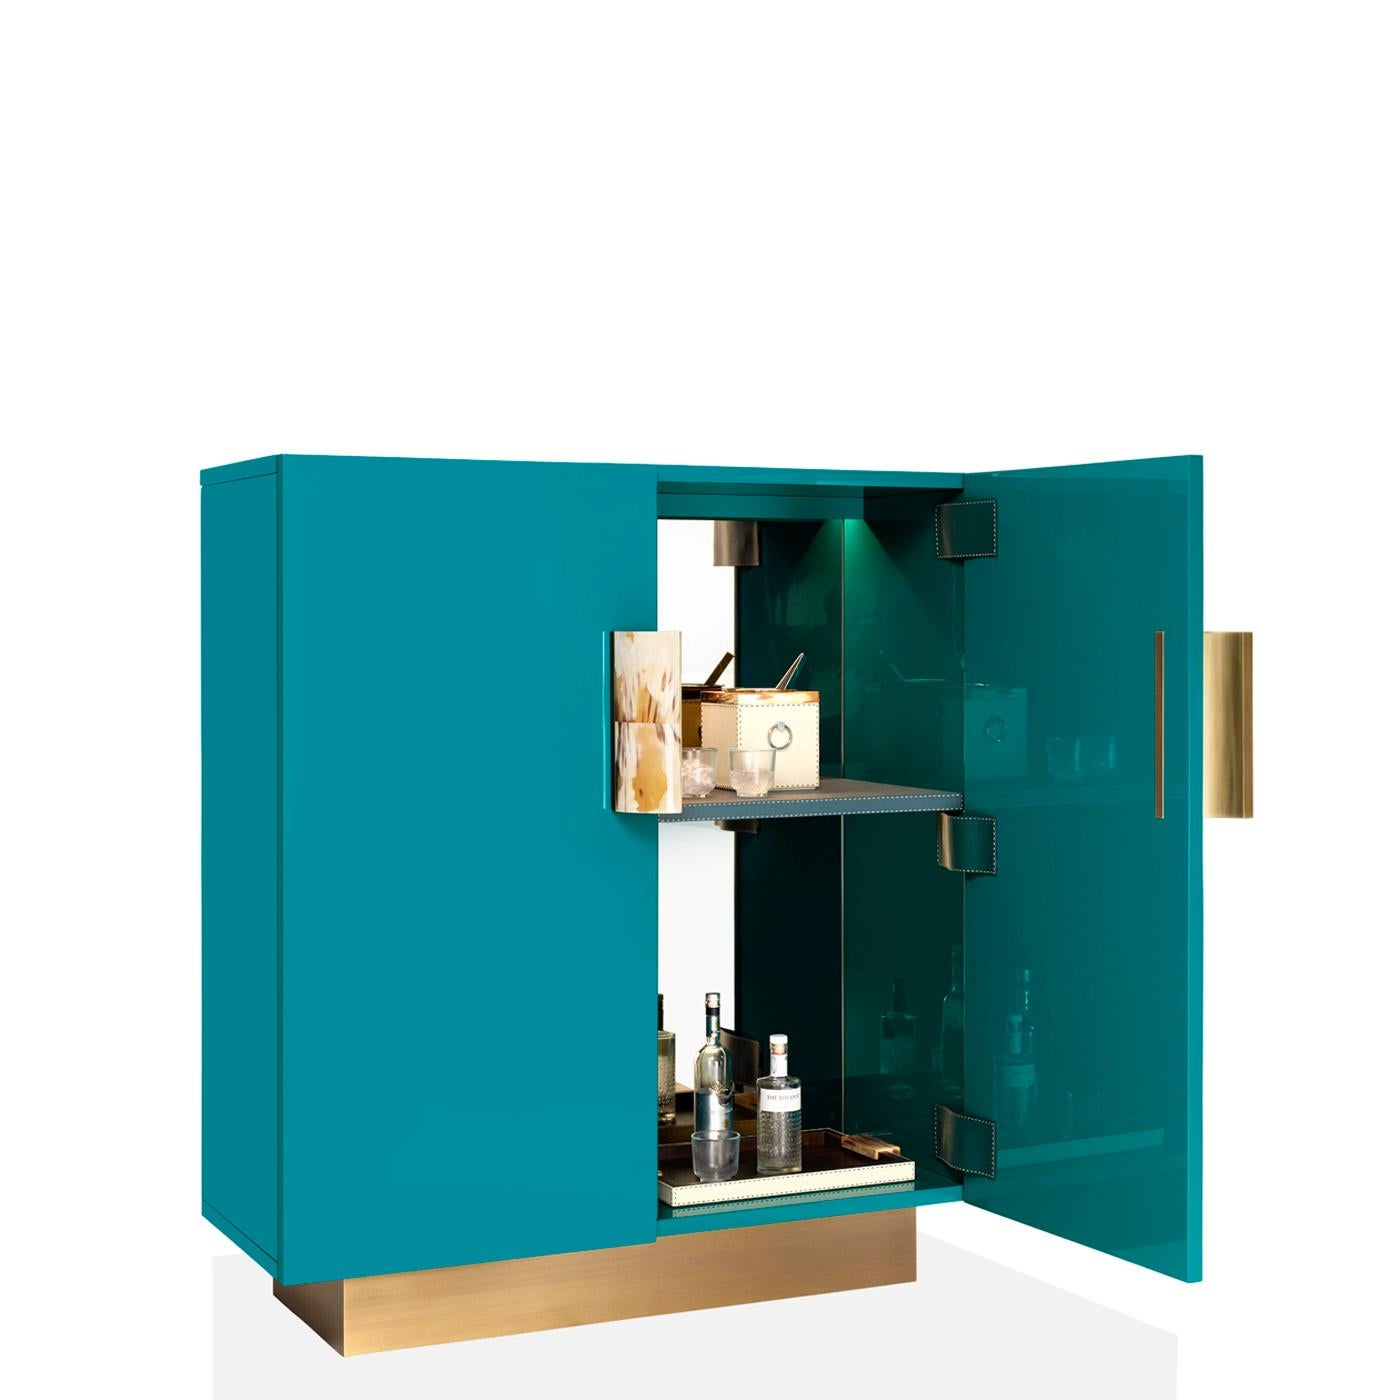 Sporting a timeless design, Stresa is a storage unit defined by essential lines and considered details. The structure in lacquered wood is proposed in a brand new water blue finish and rests on a burnished brass base. Two doors open to reveal the